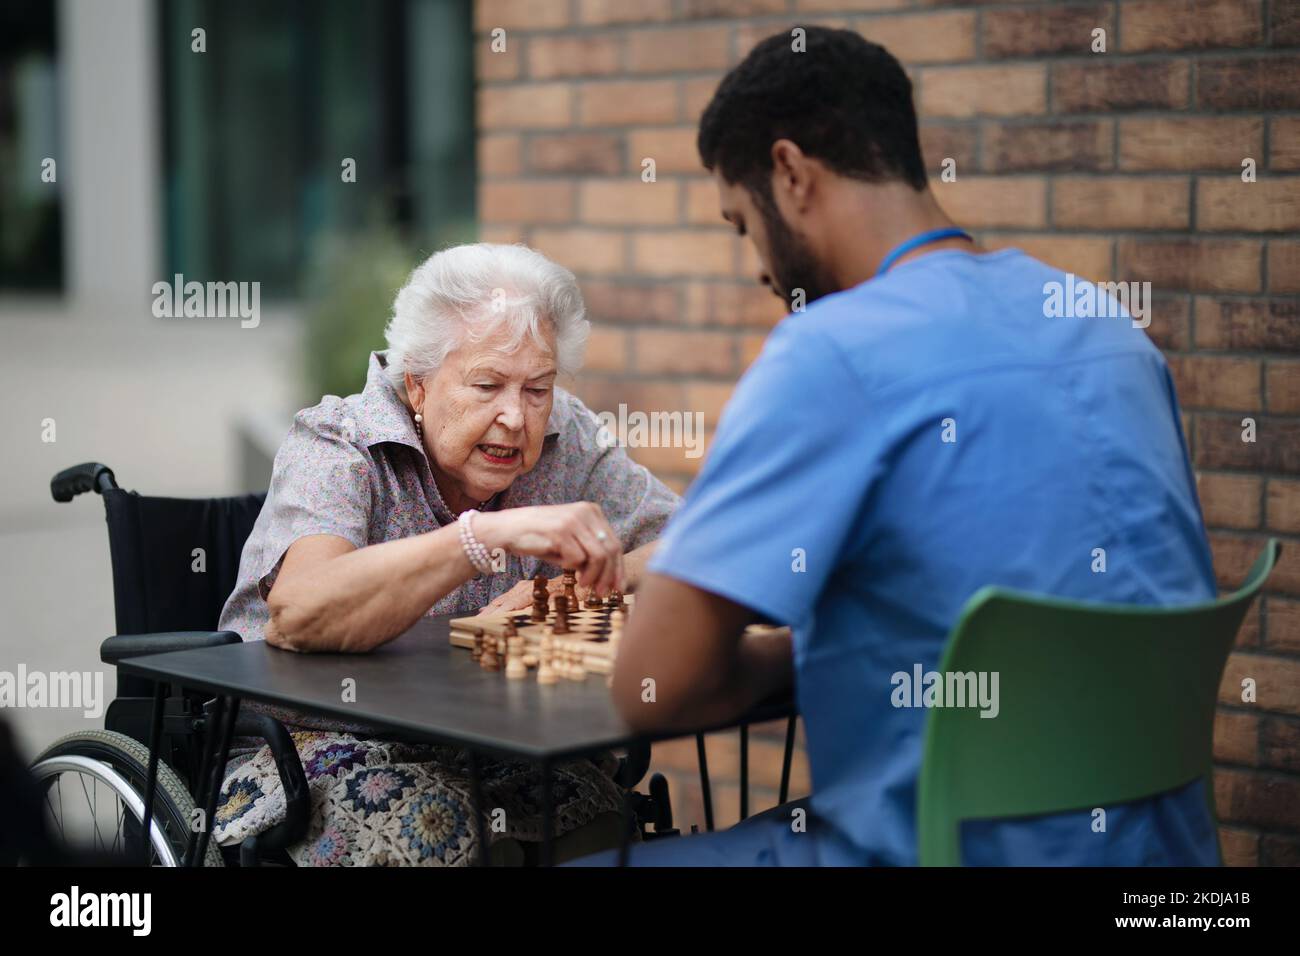 Caregiver playing chess with his client outdoor at cafe. Stock Photo